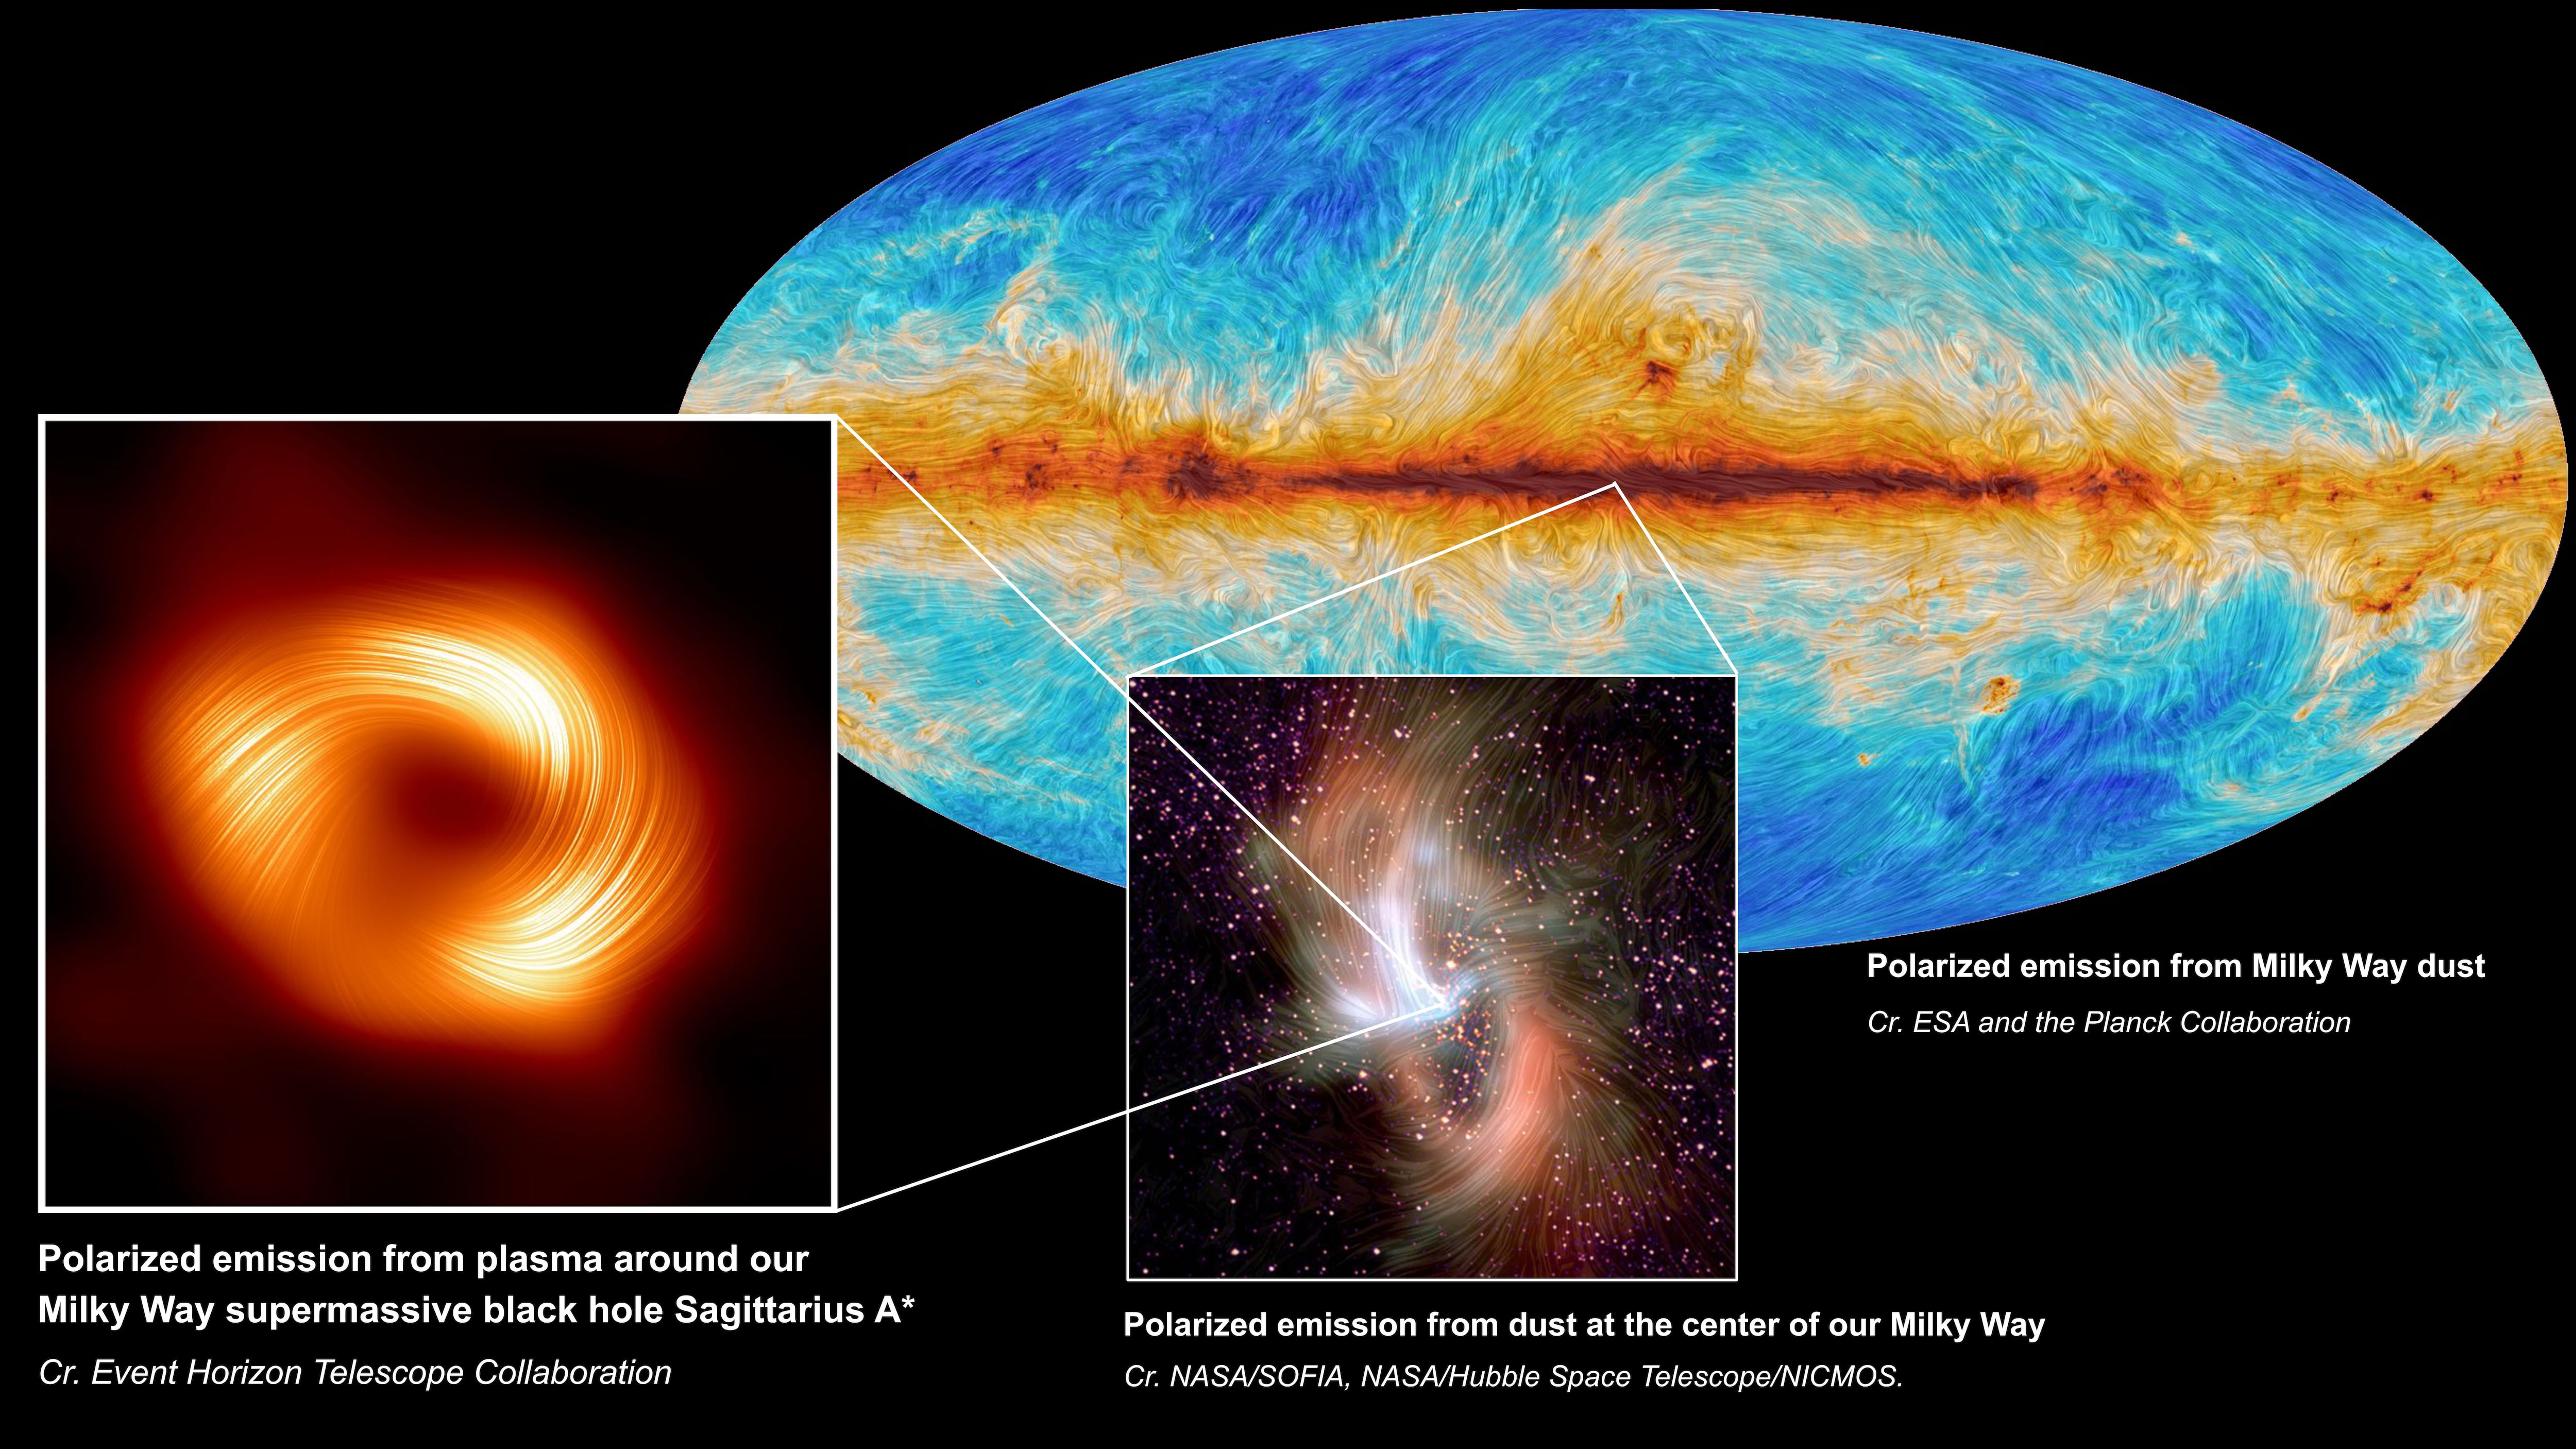 The supermassive black hole Sagittarius A* is seen at left, in polarized light. The center inset image shows polarized emission from the Milky Way's center, captured by SOFIA. The background image shows the Planck Collaboration's mapping of polarized emission from dust across the Milky Way.